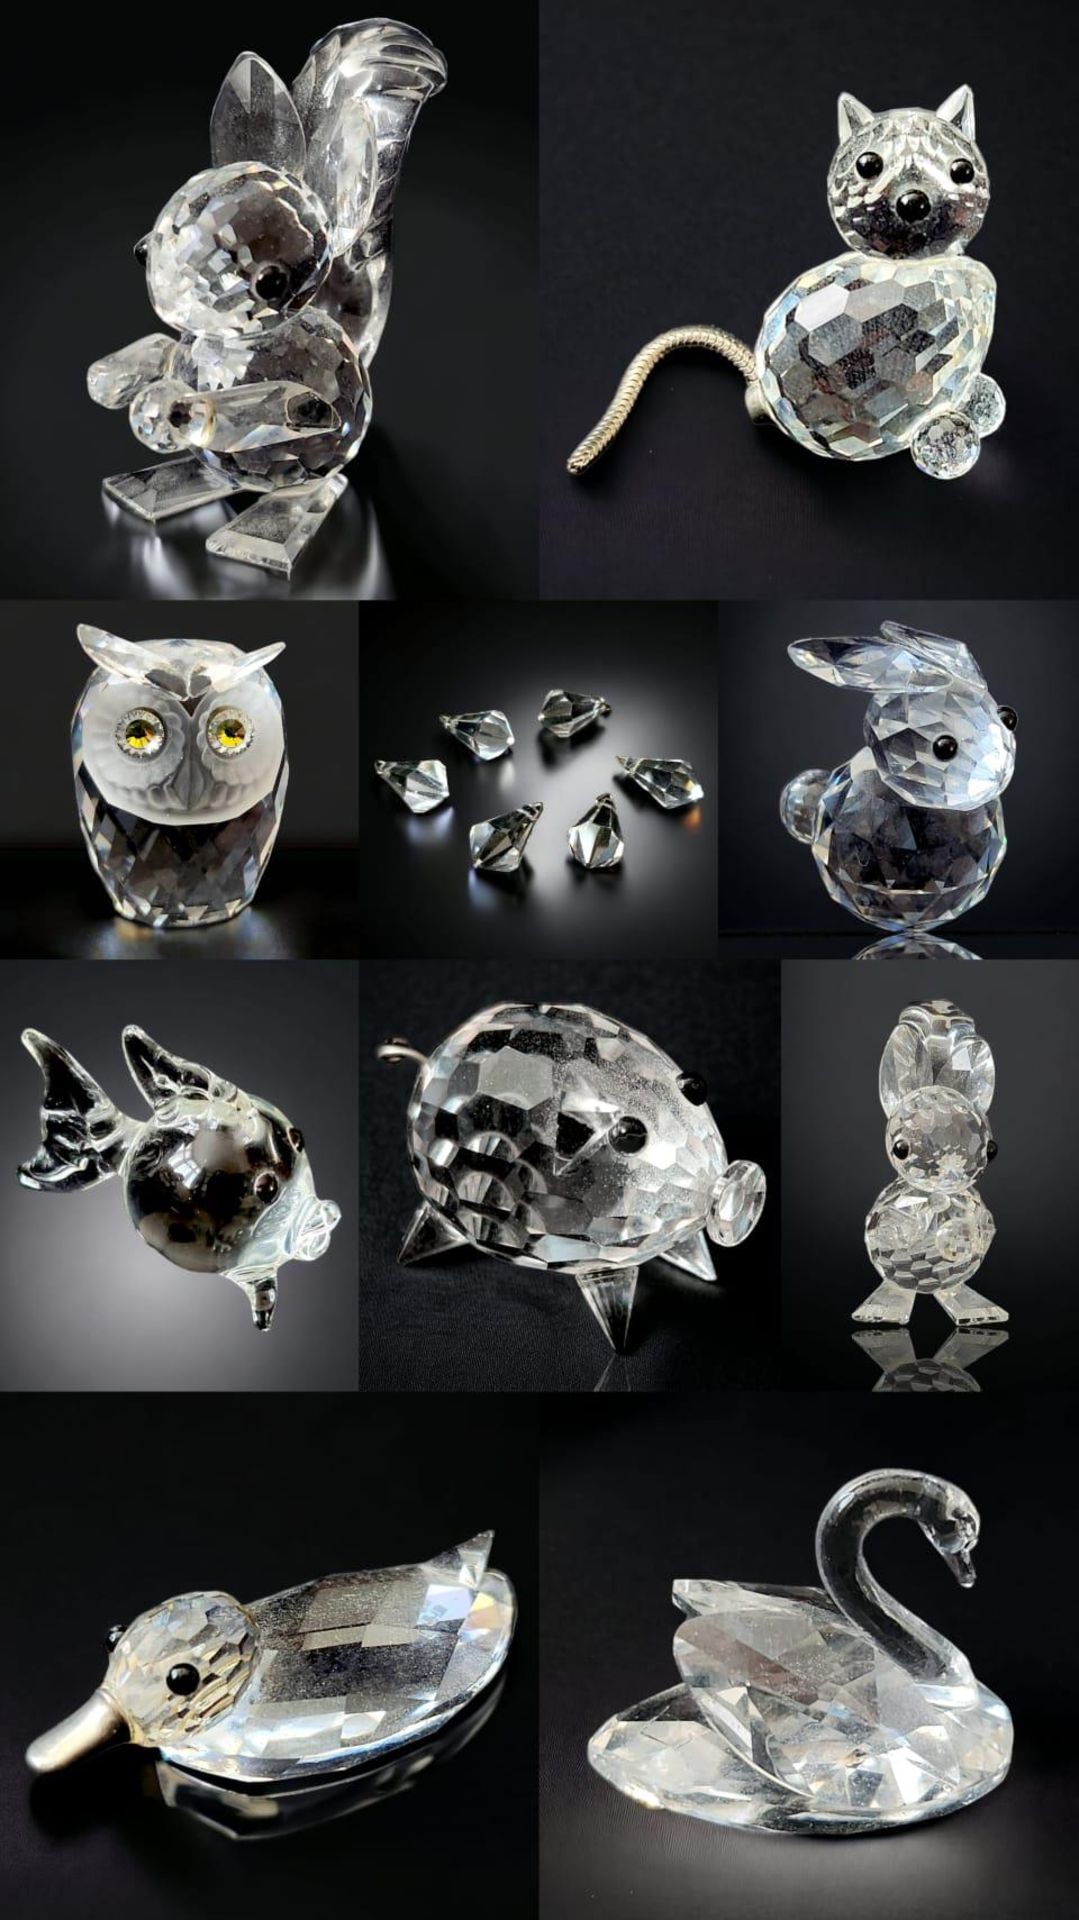 nine Swarovski Miniature Crystal Figurines Including - Duck, Cat and Rabbit. All with their original